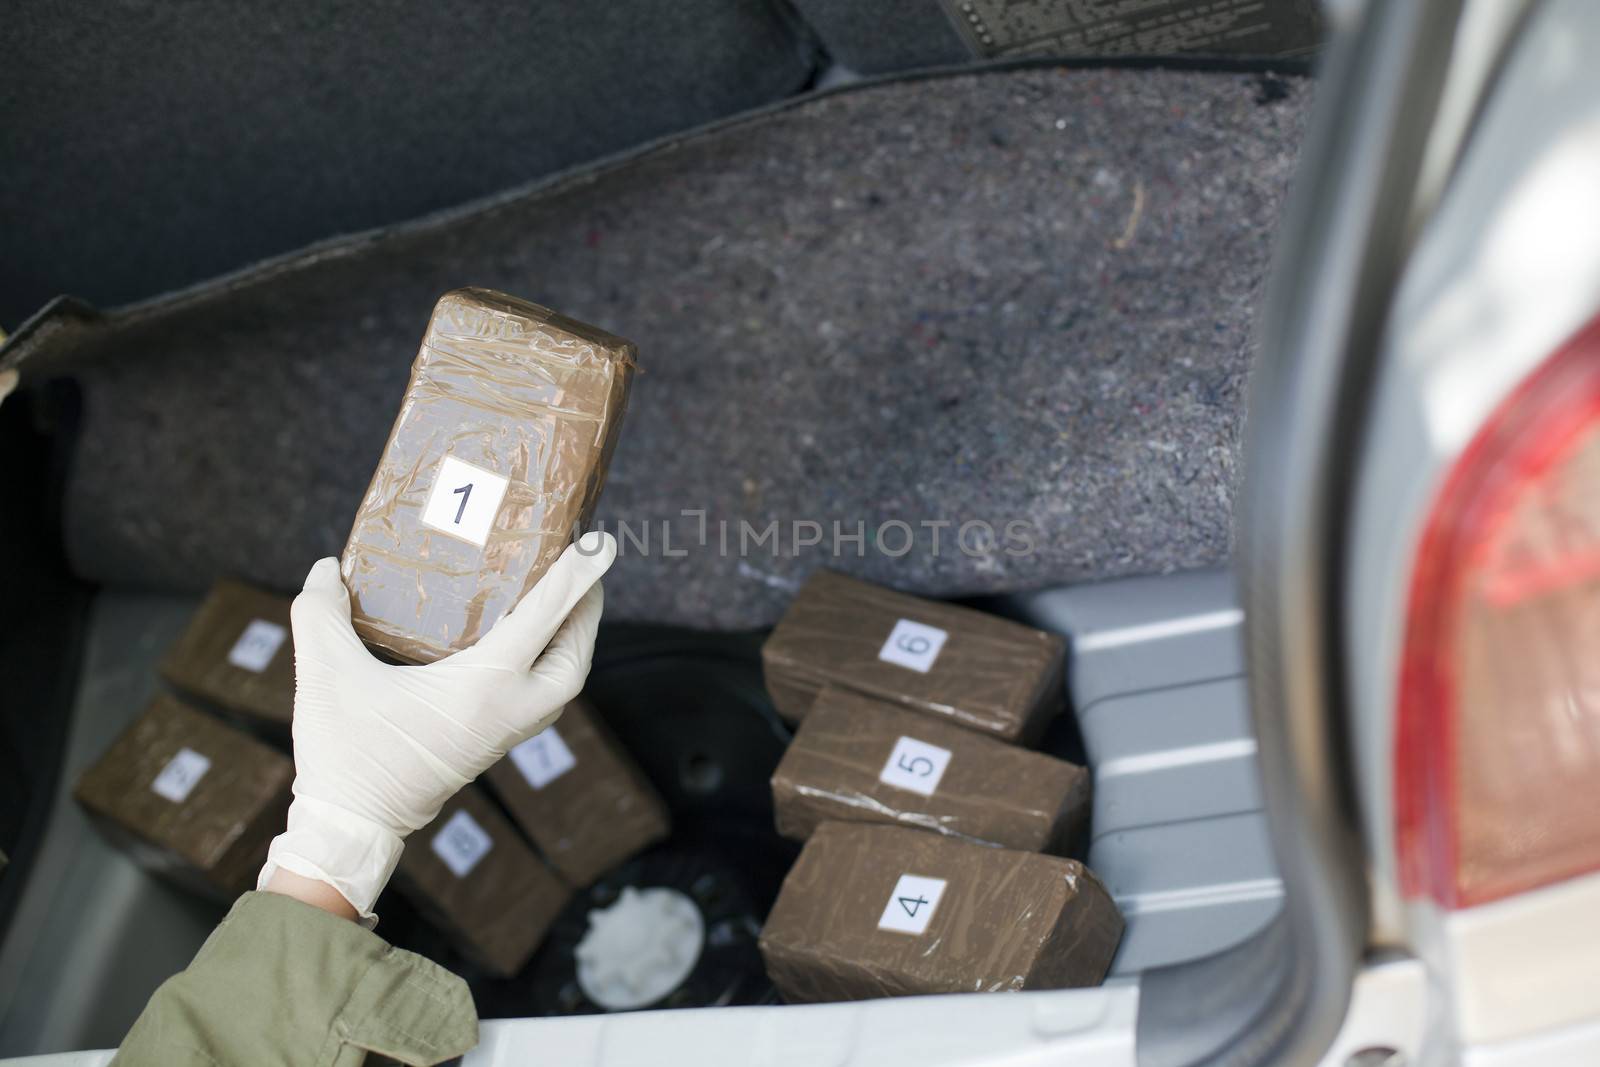 Cocaine packages in the trunk of a car